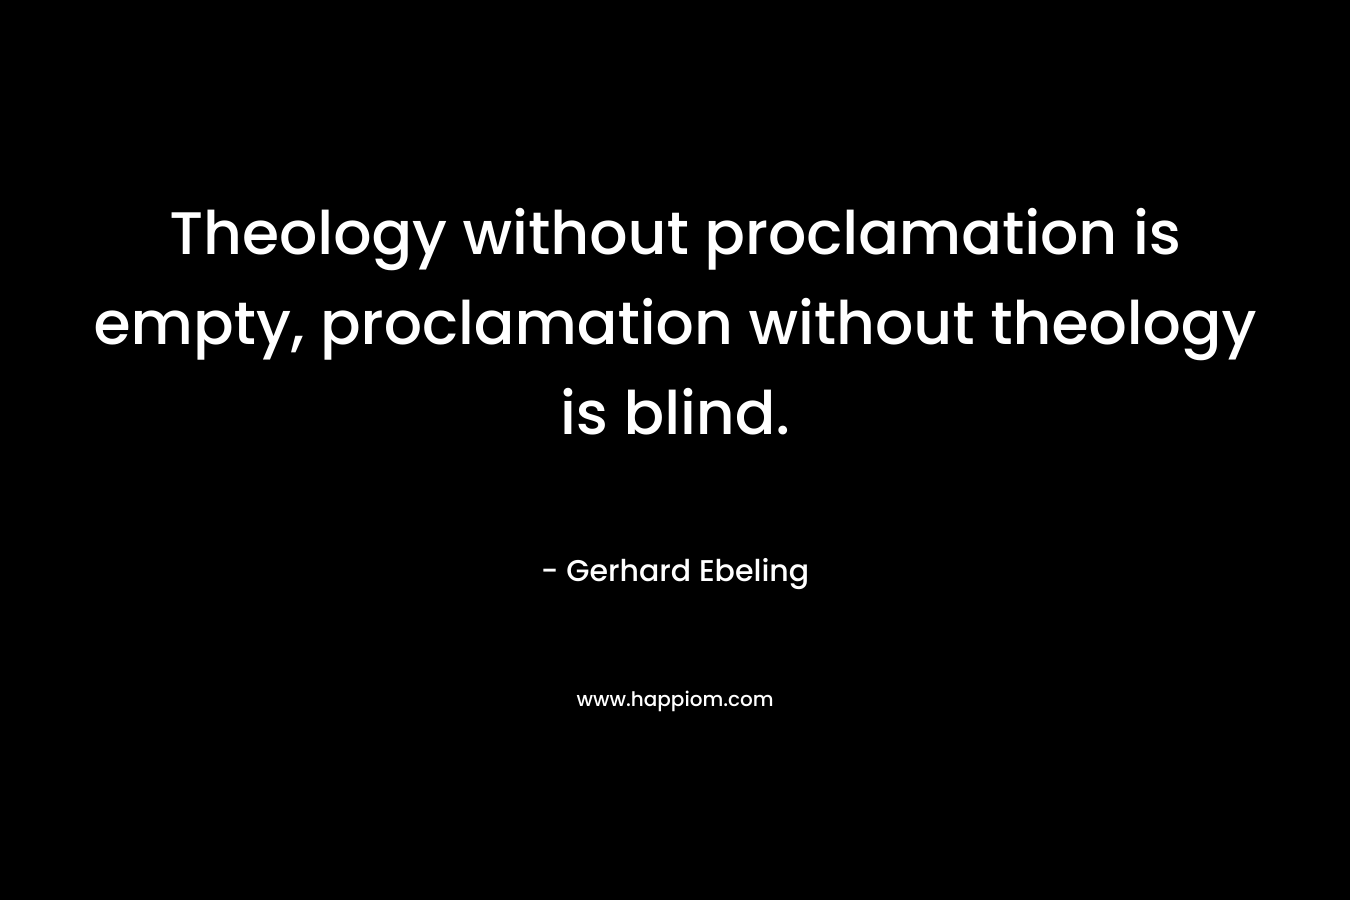 Theology without proclamation is empty, proclamation without theology is blind. – Gerhard Ebeling